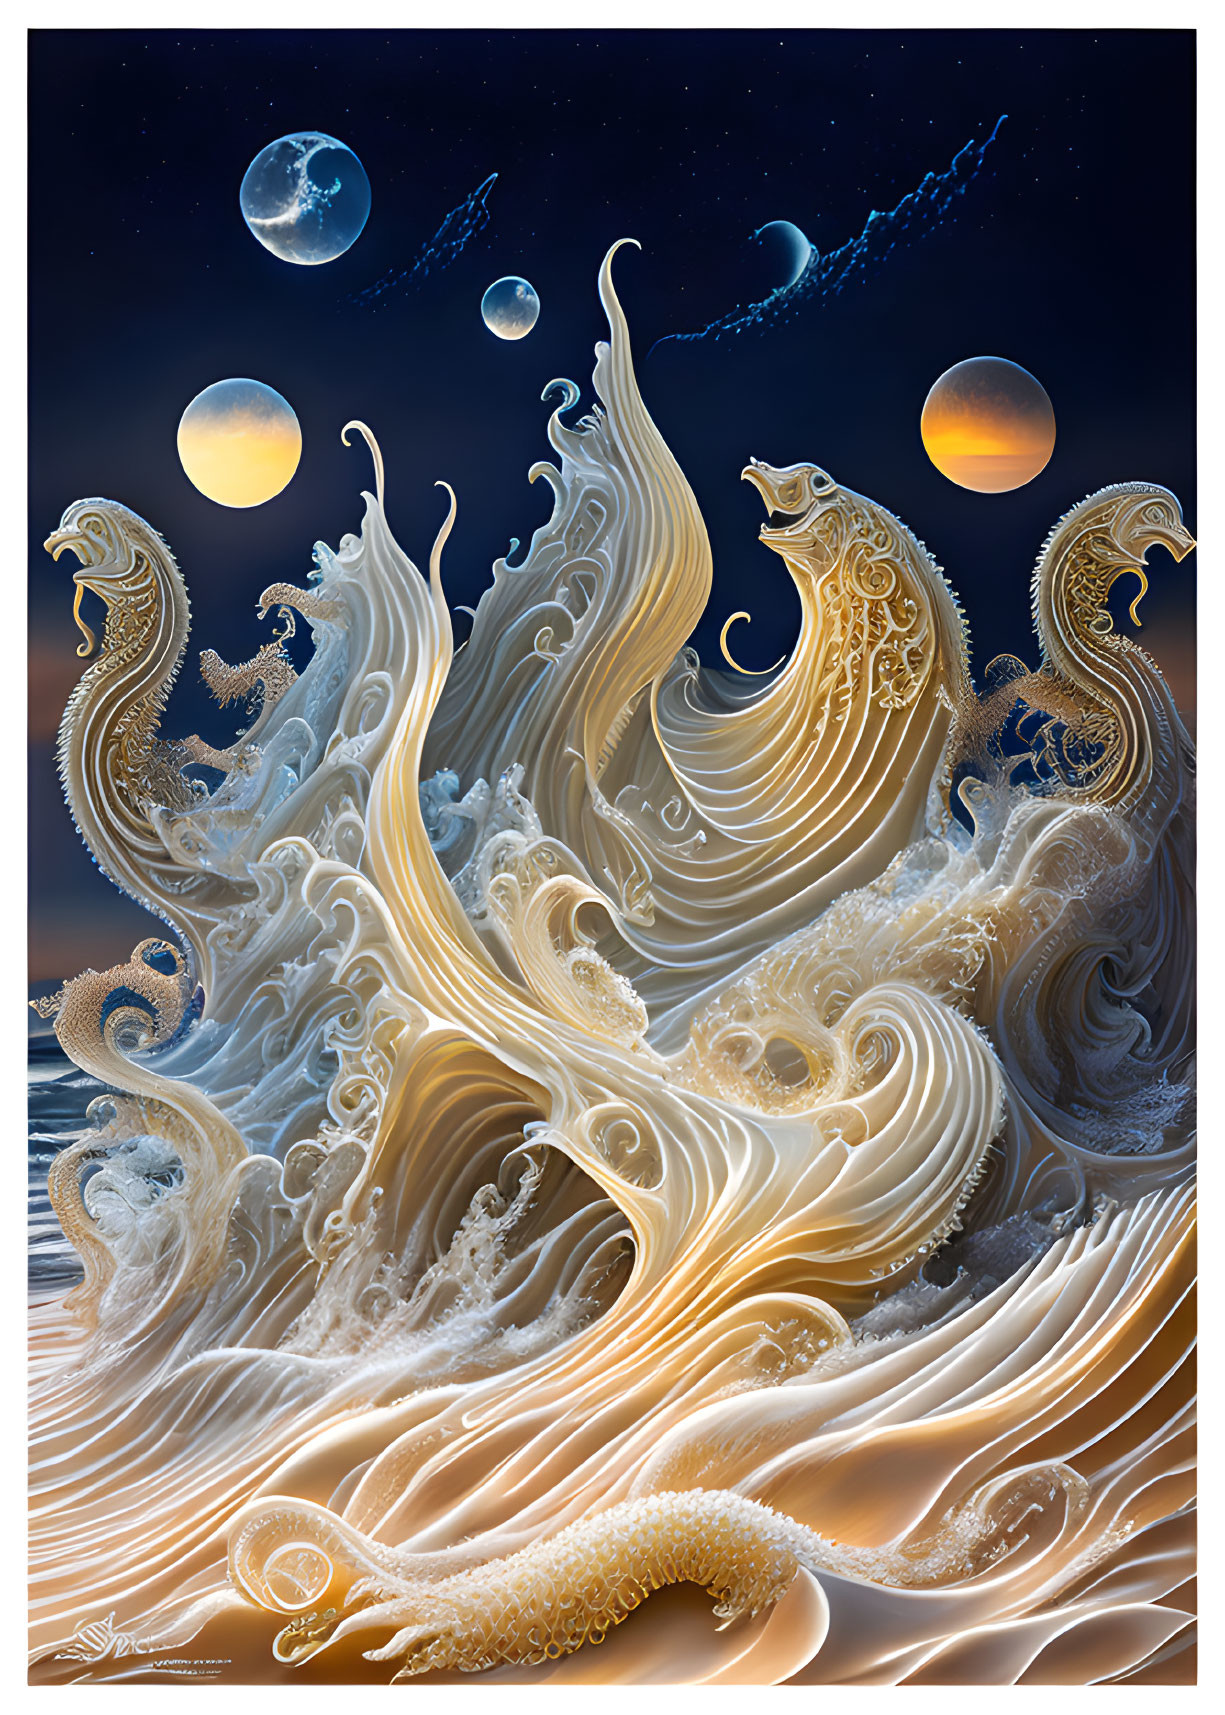 Golden Dragon-Shaped Waves in Night Sky with Planets and Shooting Stars